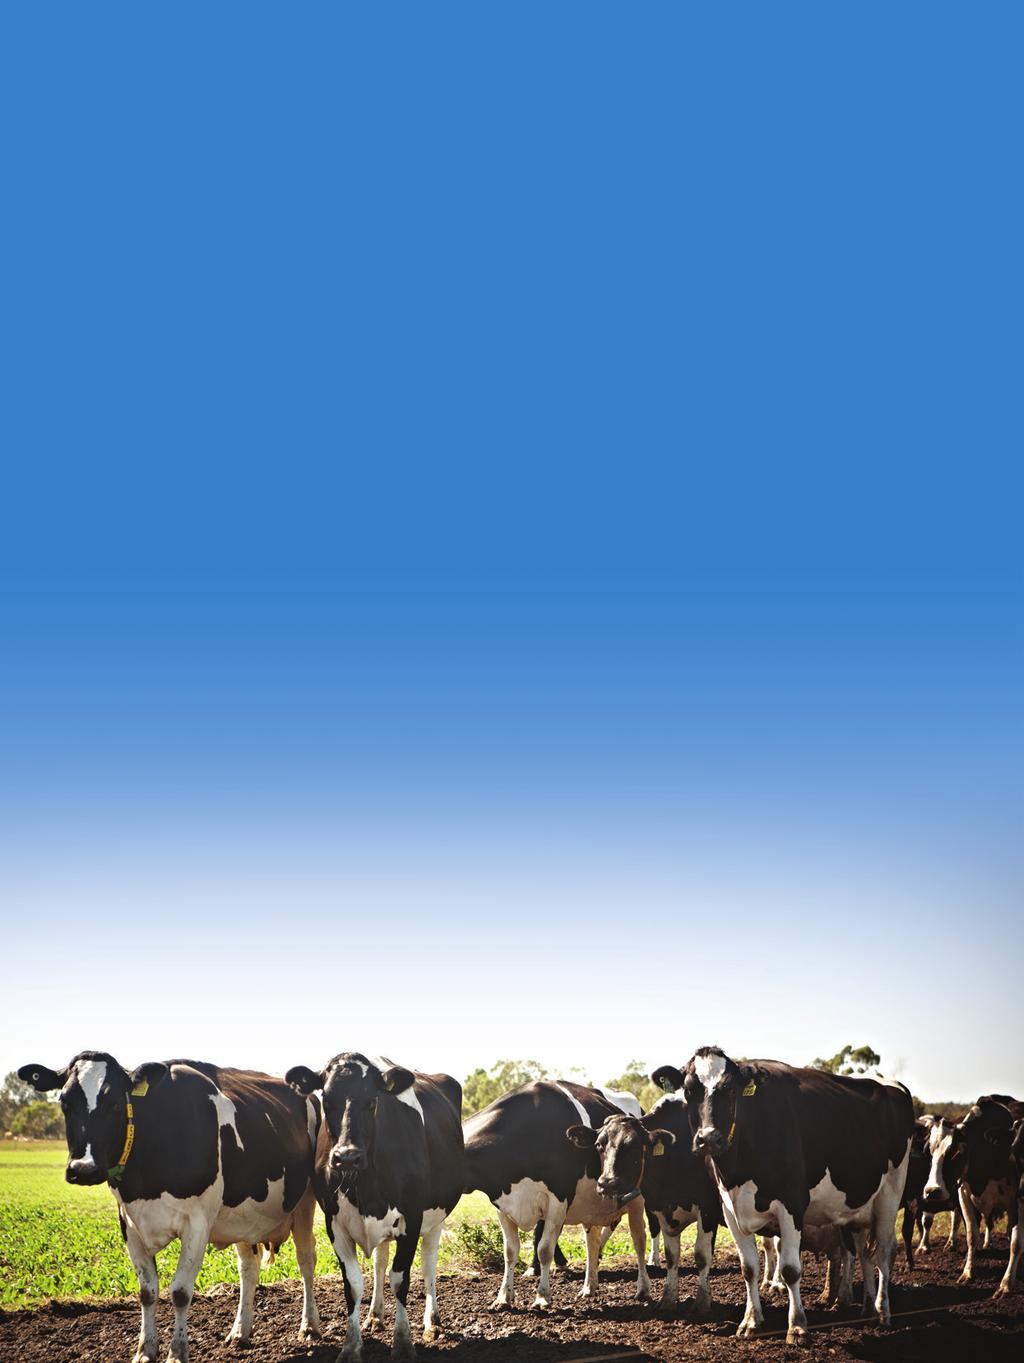 The Western Australian dairy industry is one that is poised and ready for change. It offers many opportunities for investment in dairy production and exporting.